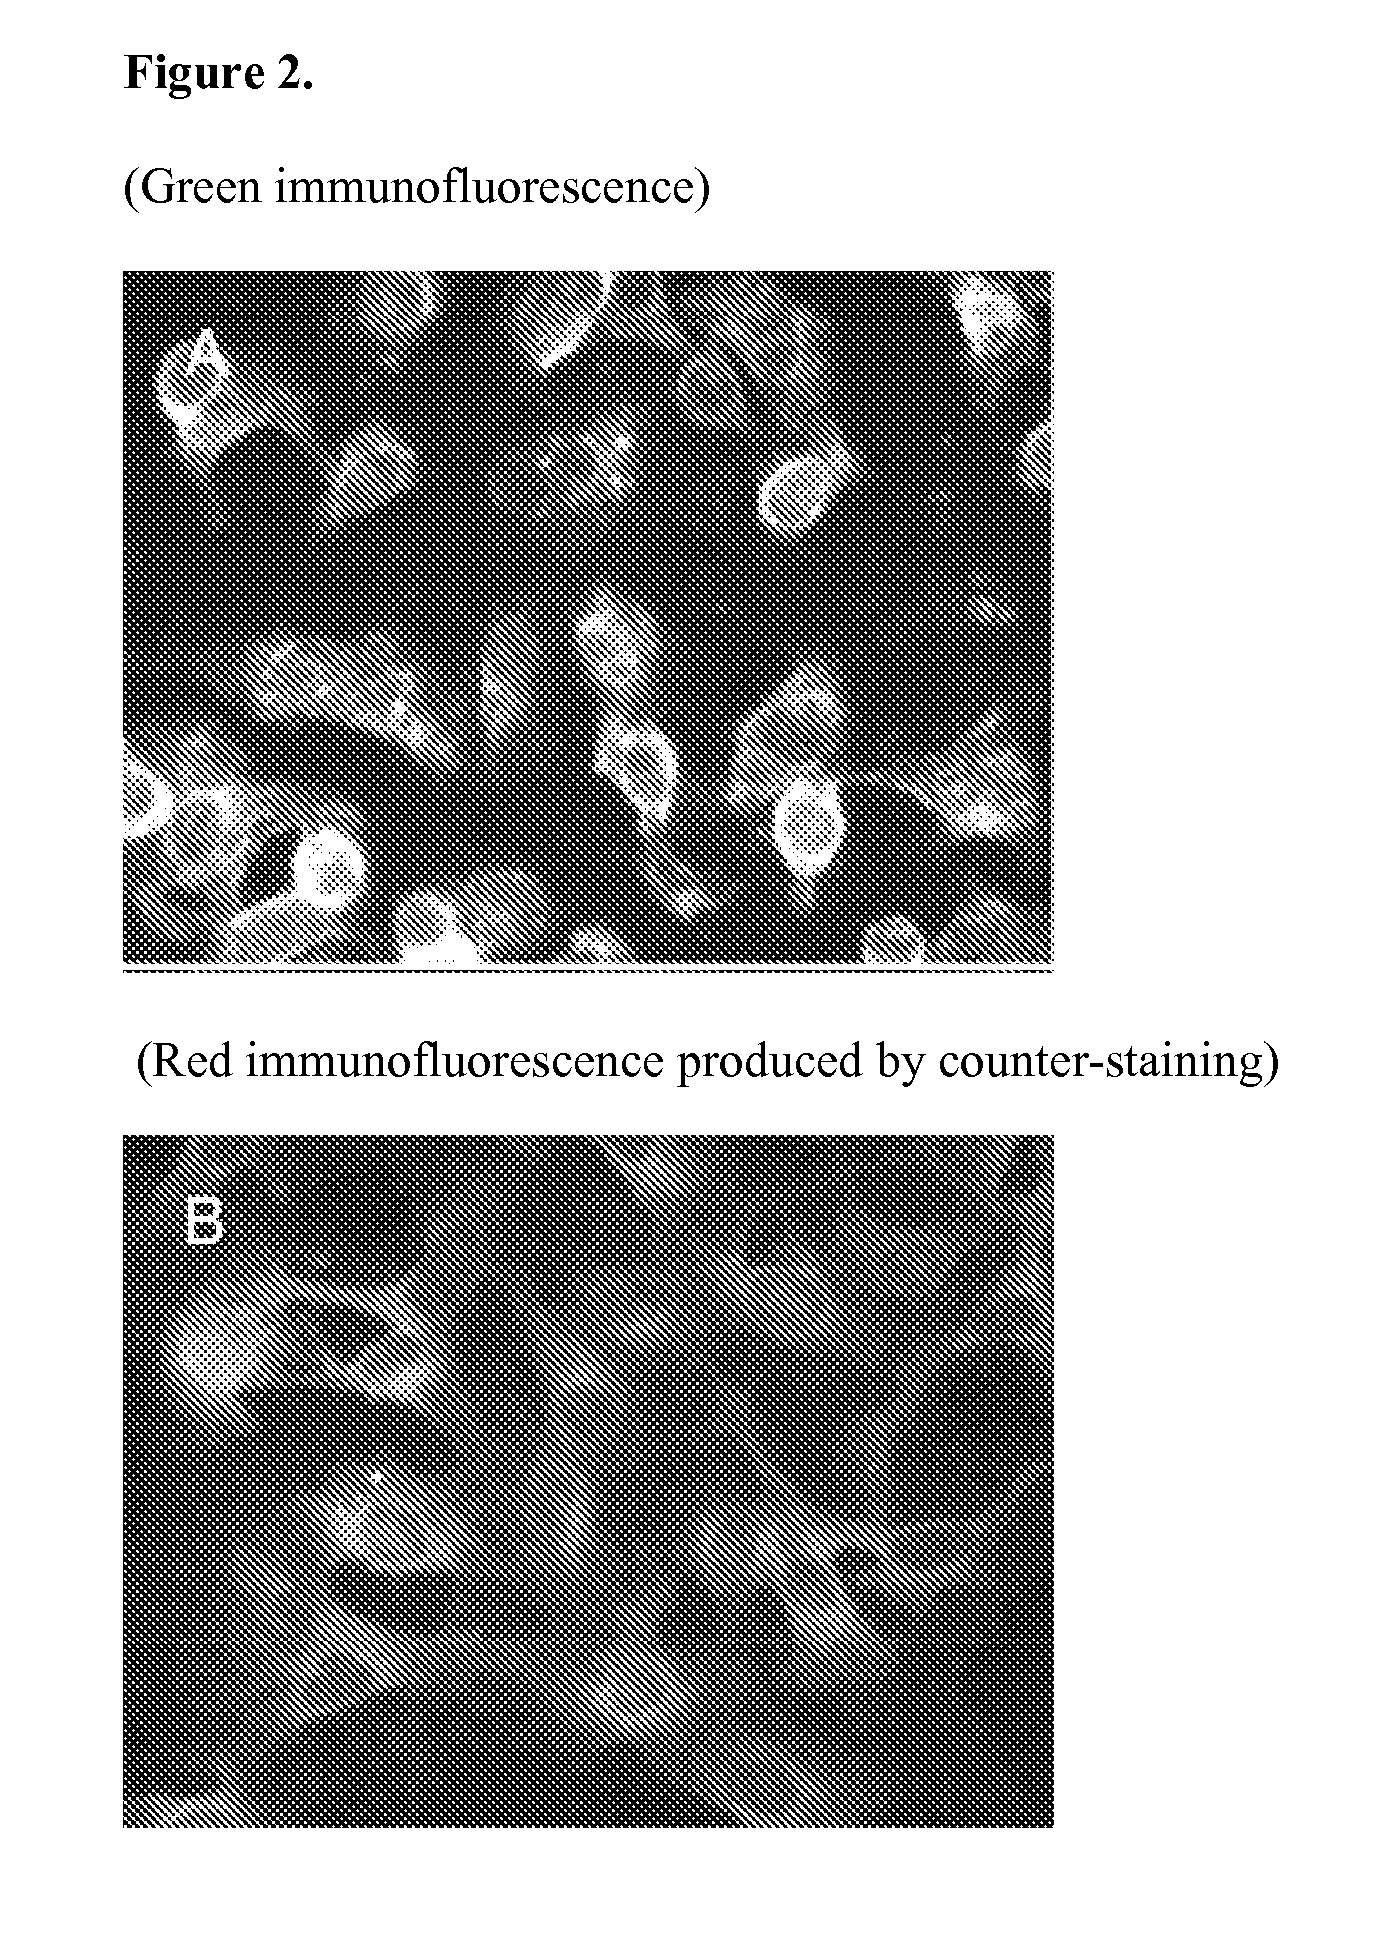 Pneumovirus compositions and methods for using the same